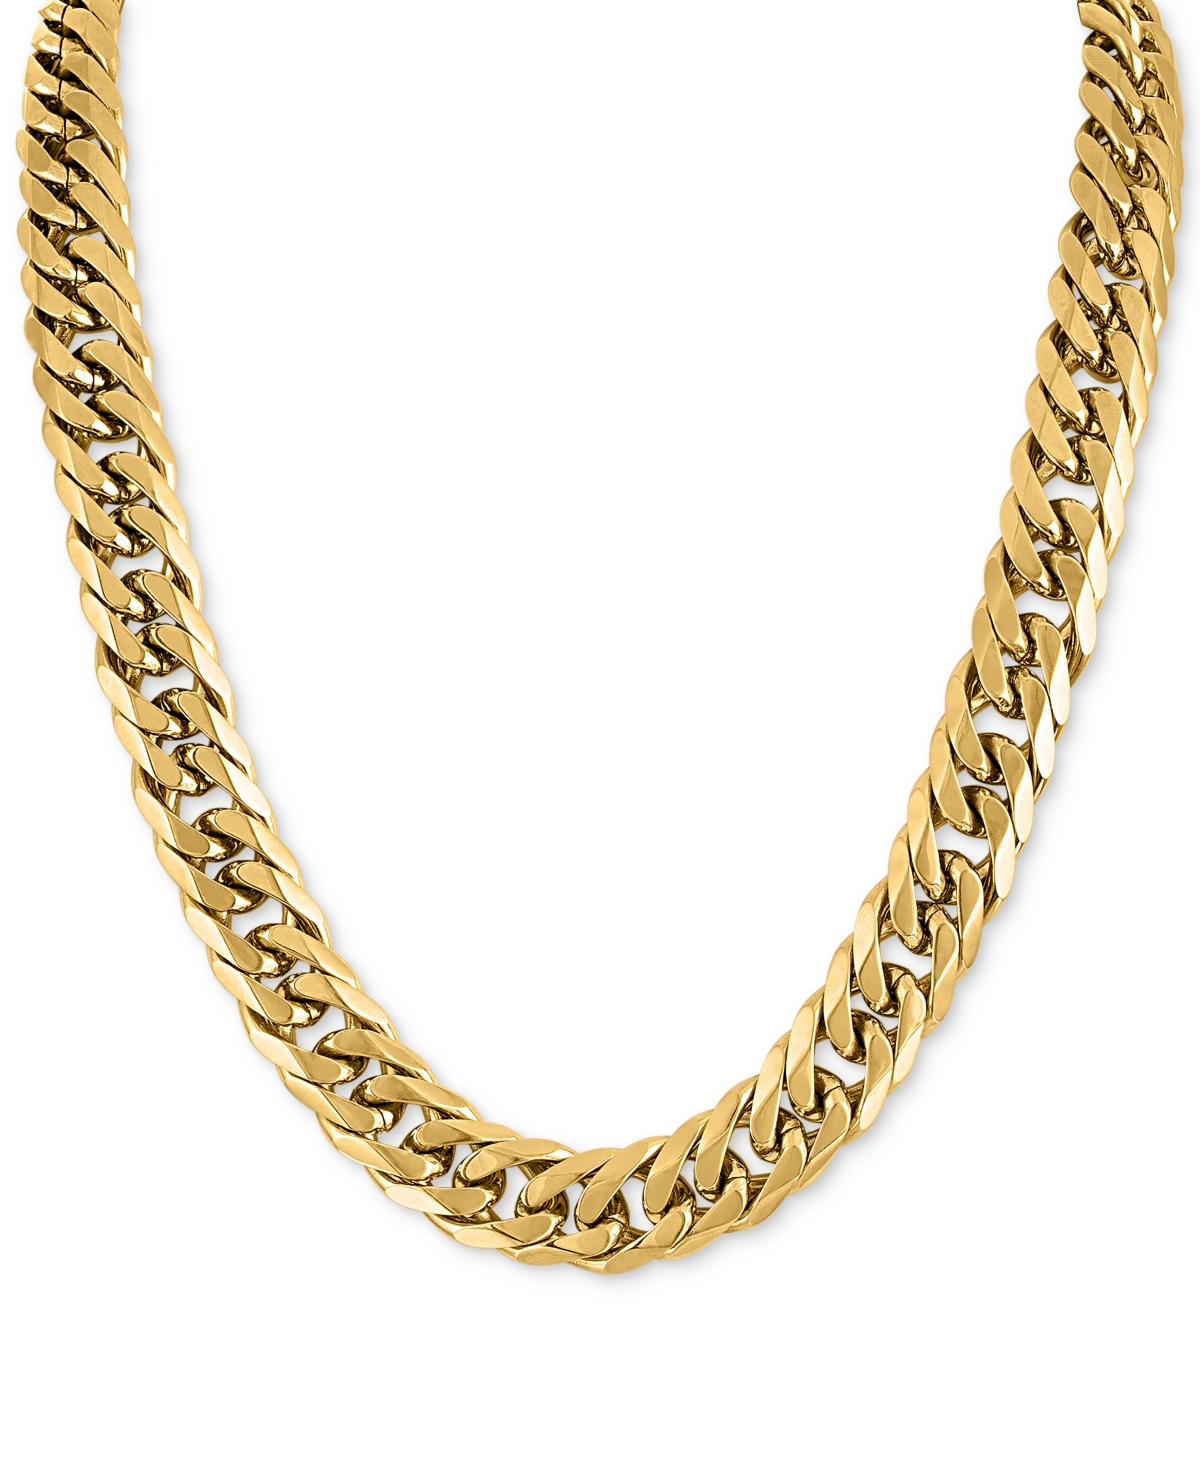 Wide Curb Link 24" Chain Necklace in Gold Ion-Plated Stainless Steel & Stainless Steel, Created for Macy's - Steel